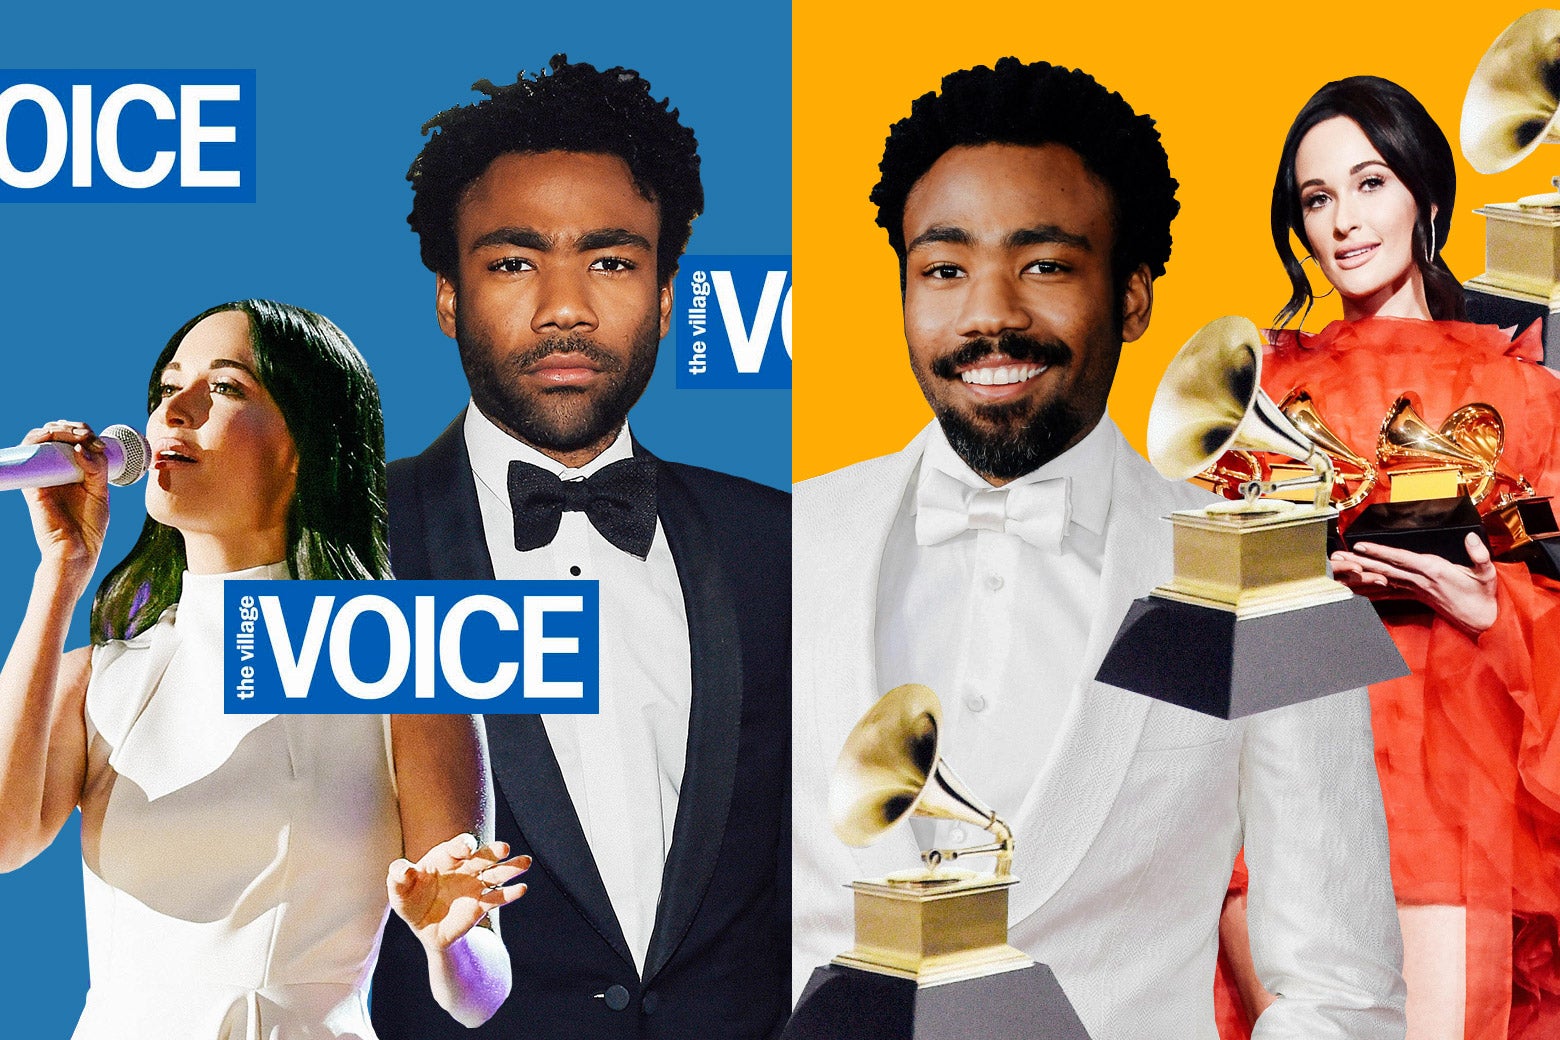 Kacey Musgraves and Donald Glover depicted with the Village Voice logo and Grammy statues.